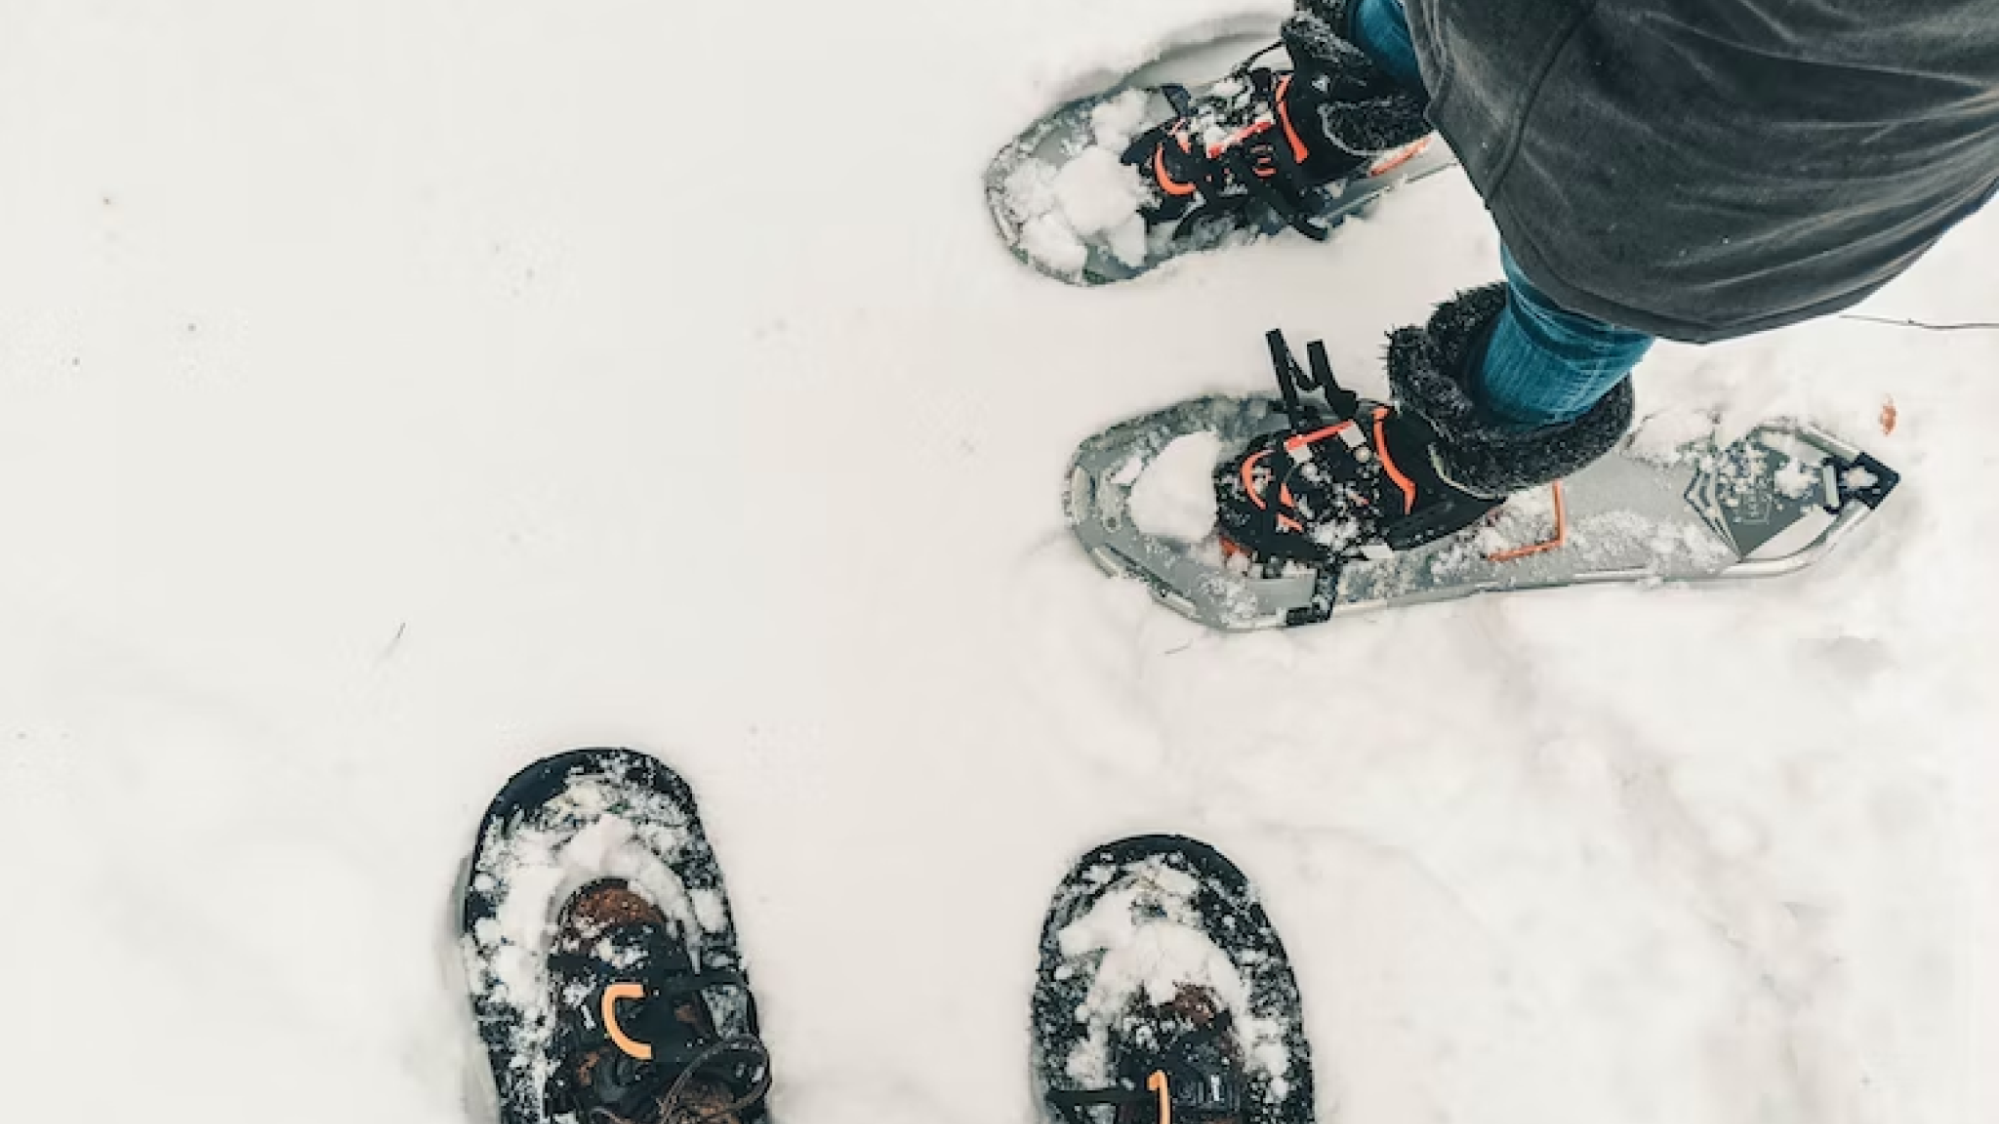 Close-up view of people wearing snow shoes